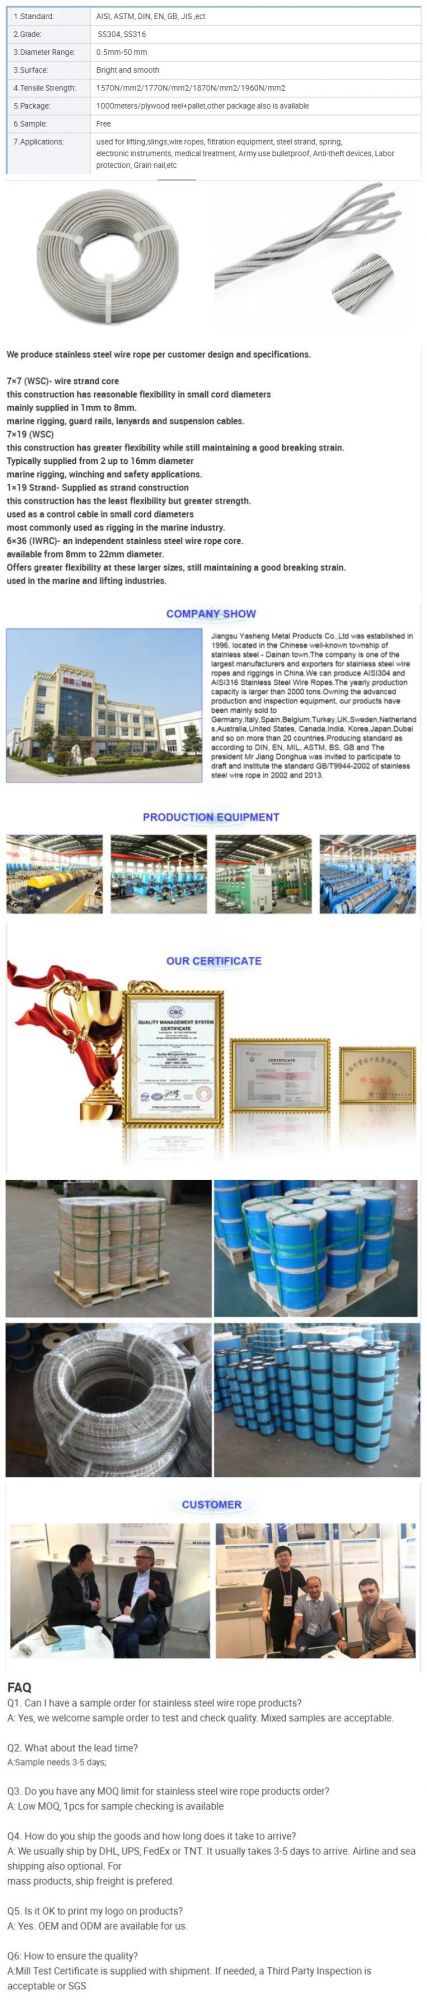 Stainless Wire Rope Factory Selling One of The Largest Manufacturers